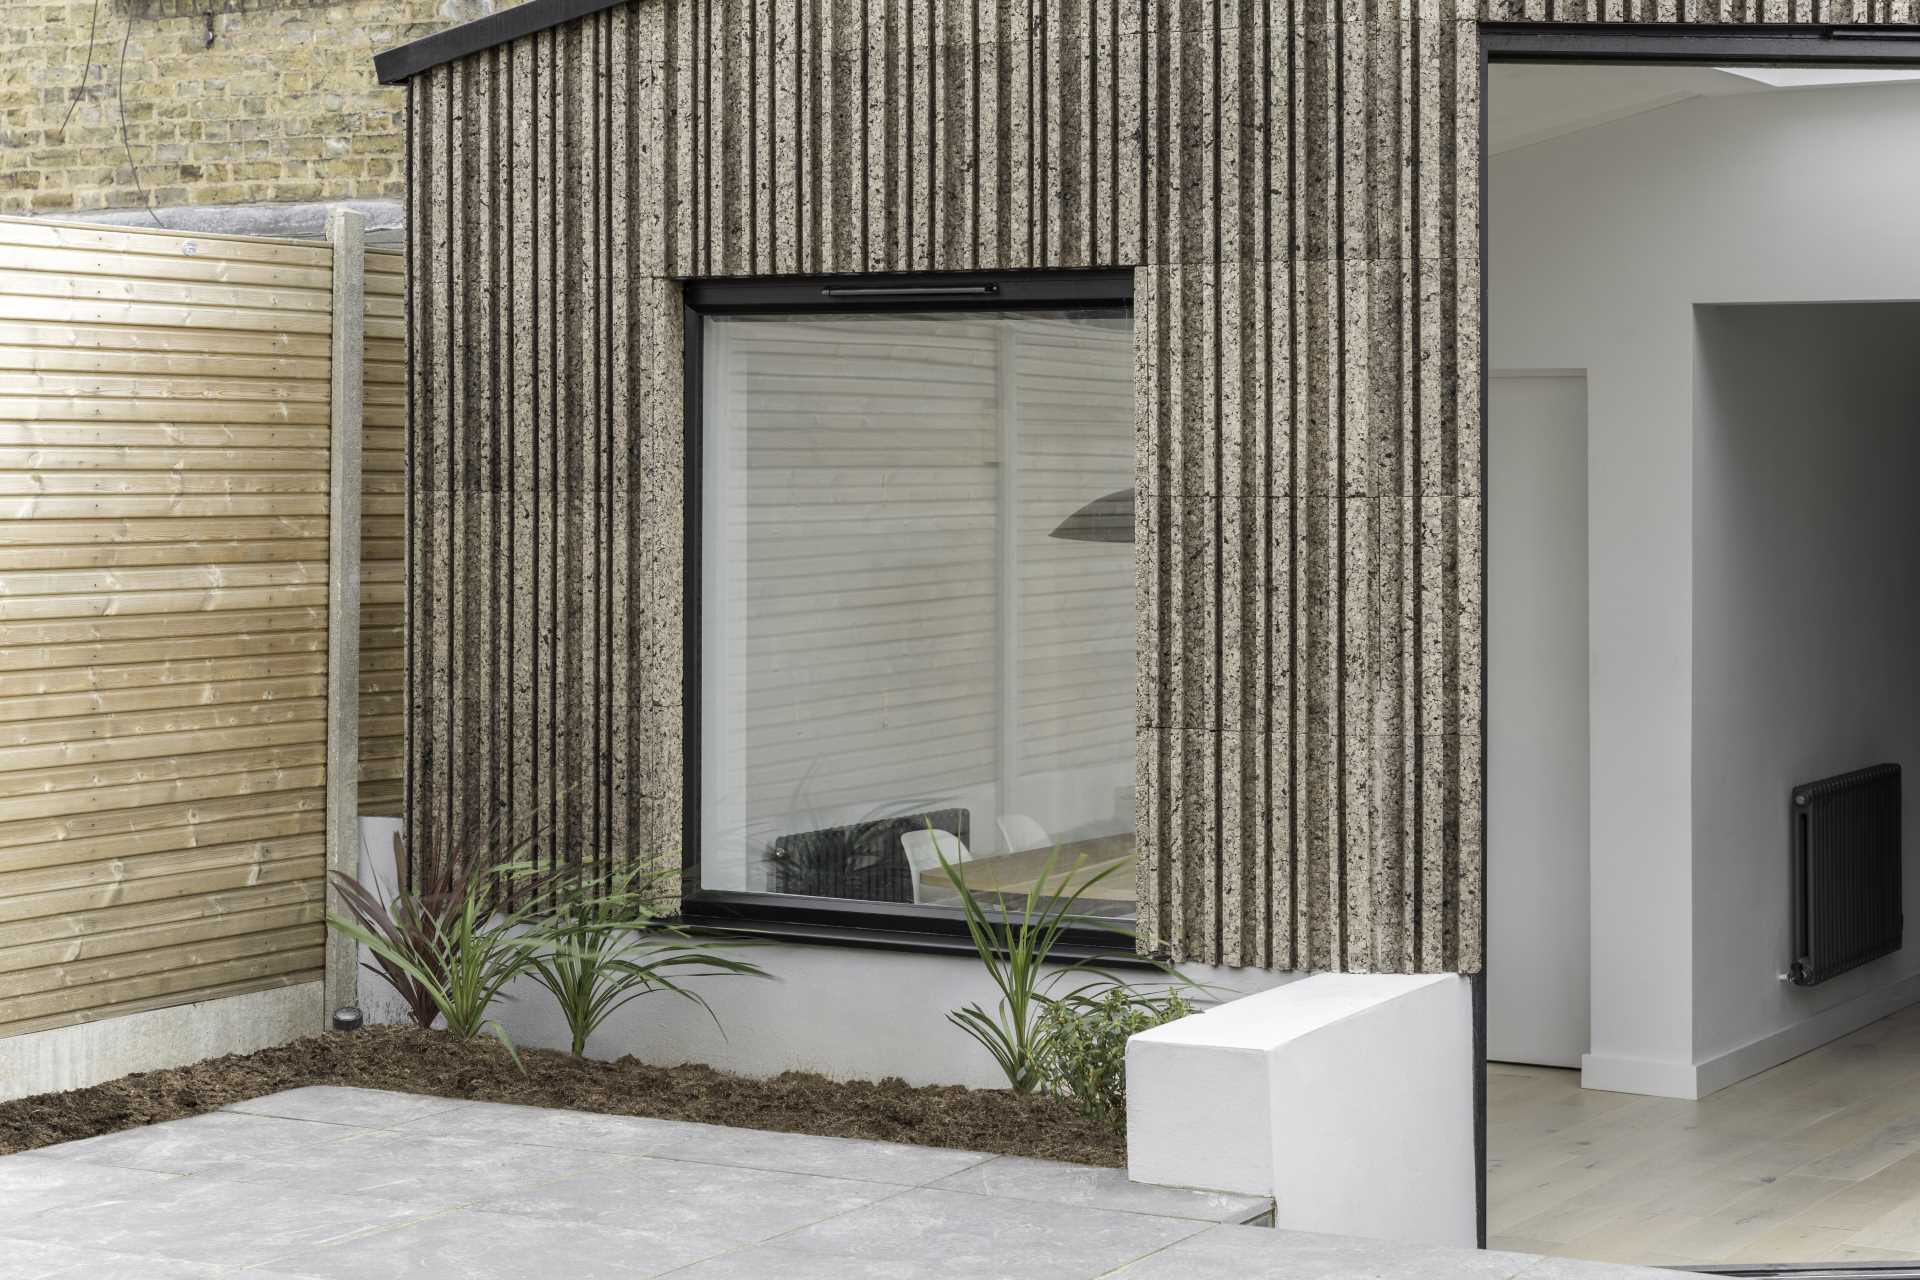 A modern home extension that's clad in patterned cork, and includes black window frames.